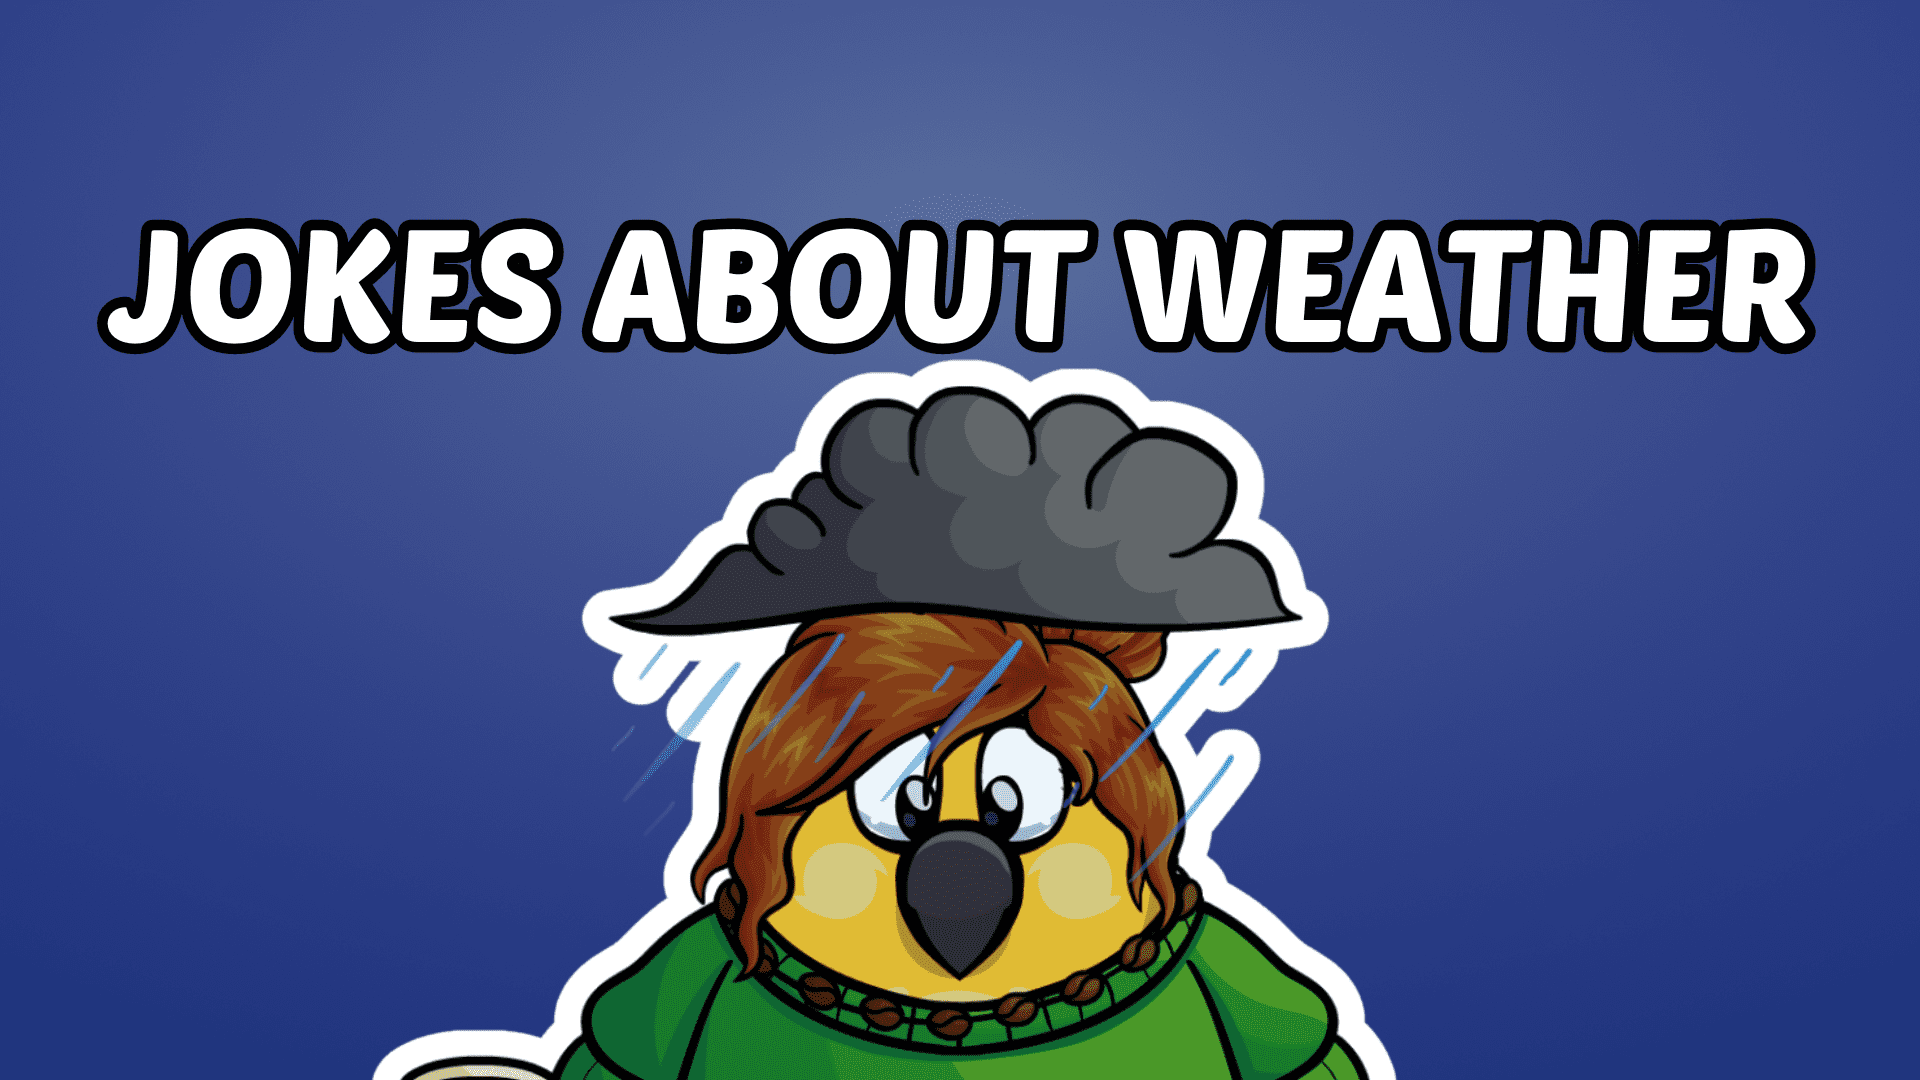 Jokes about weather for kids with a rainy cloud over a parrot. Dark blue background.